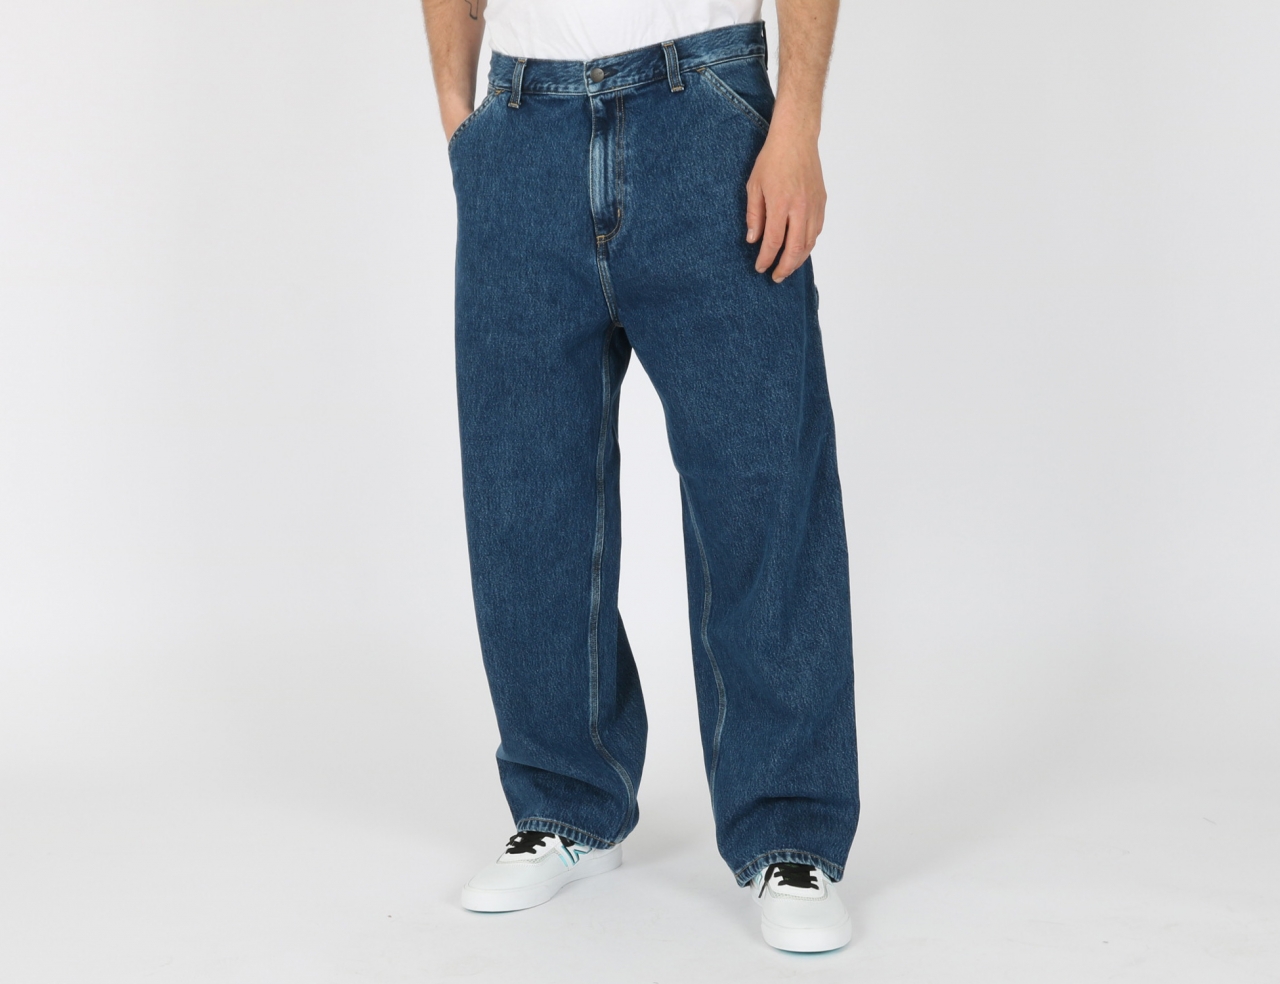 Carhartt WIP Brandon SK Pant - Blue Stone Washed